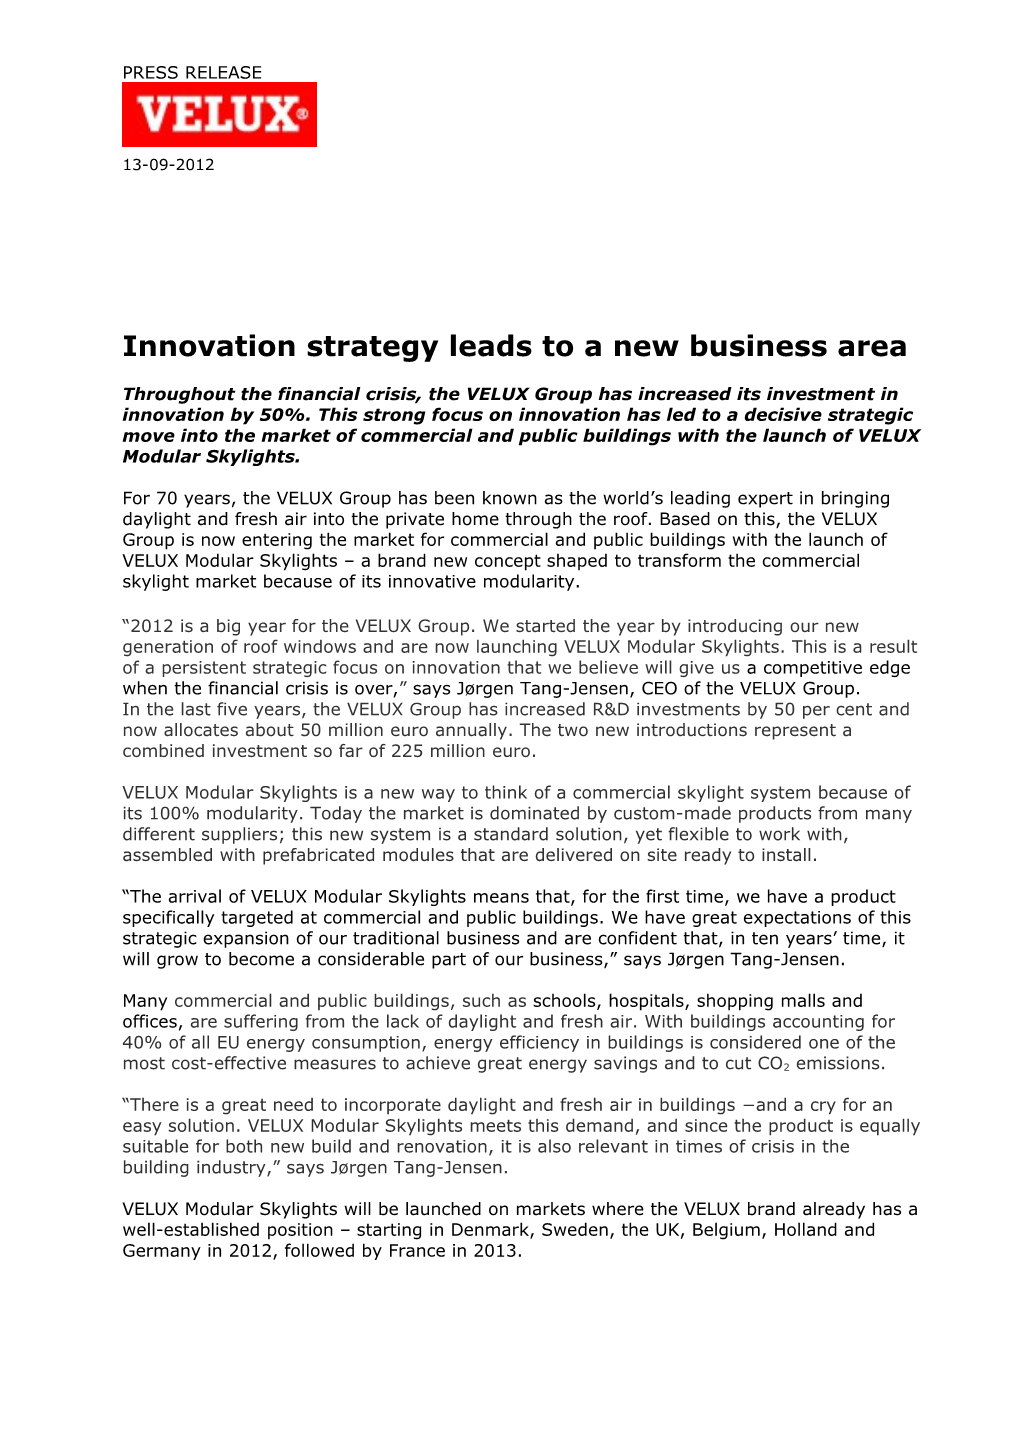 Innovation Strategy Leads to a New Business Area